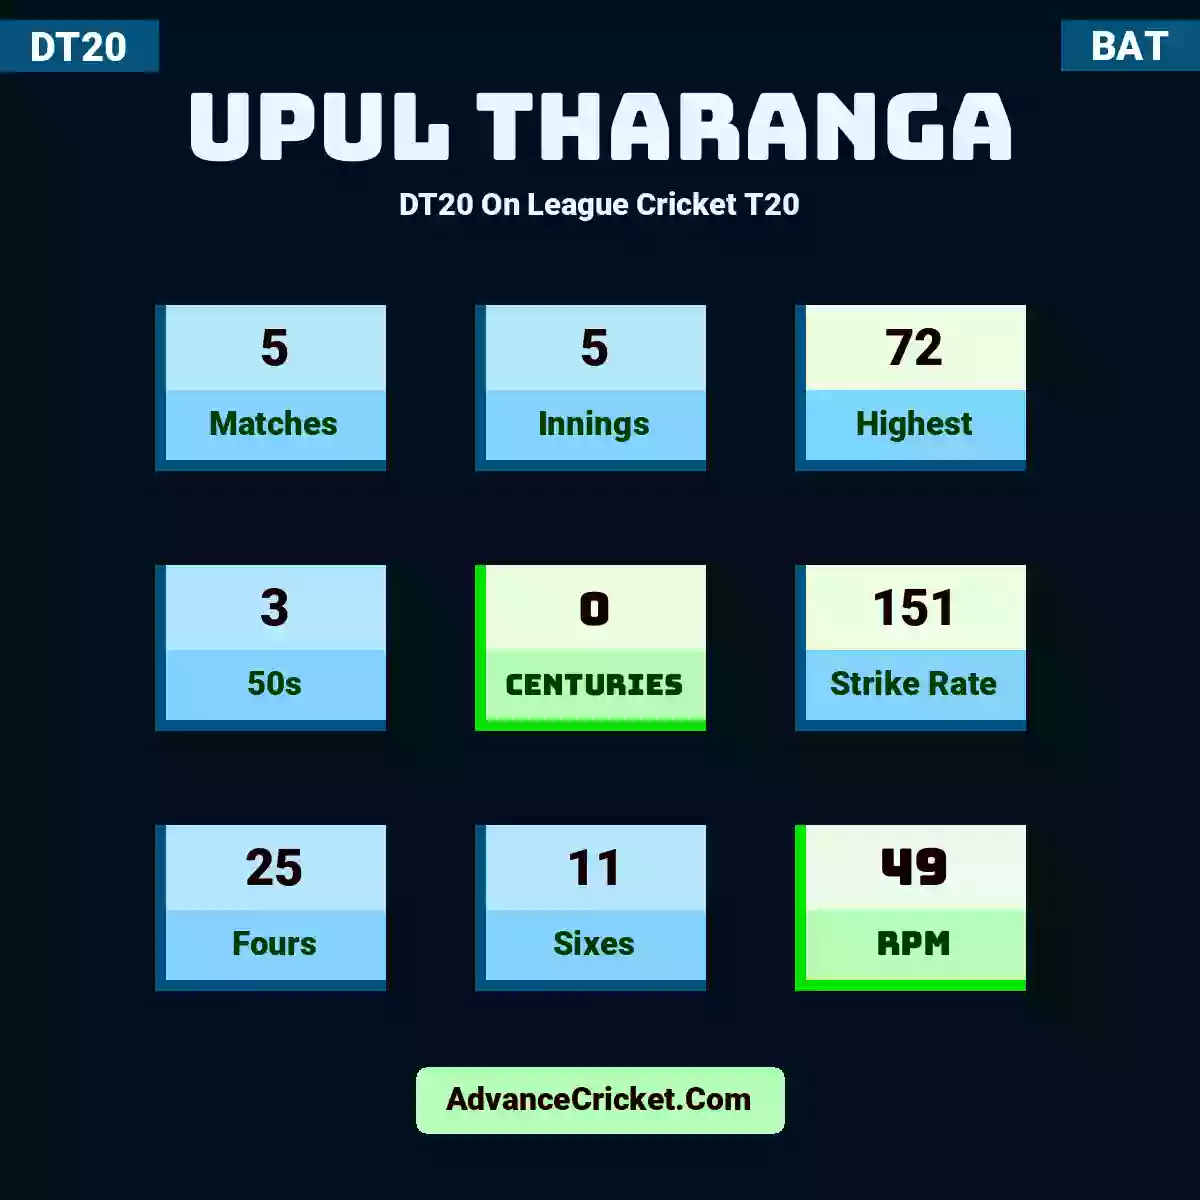 Upul Tharanga DT20  On League Cricket T20, Upul Tharanga played 5 matches, scored 72 runs as highest, 3 half-centuries, and 0 centuries, with a strike rate of 151. U.Tharanga hit 25 fours and 11 sixes, with an RPM of 49.